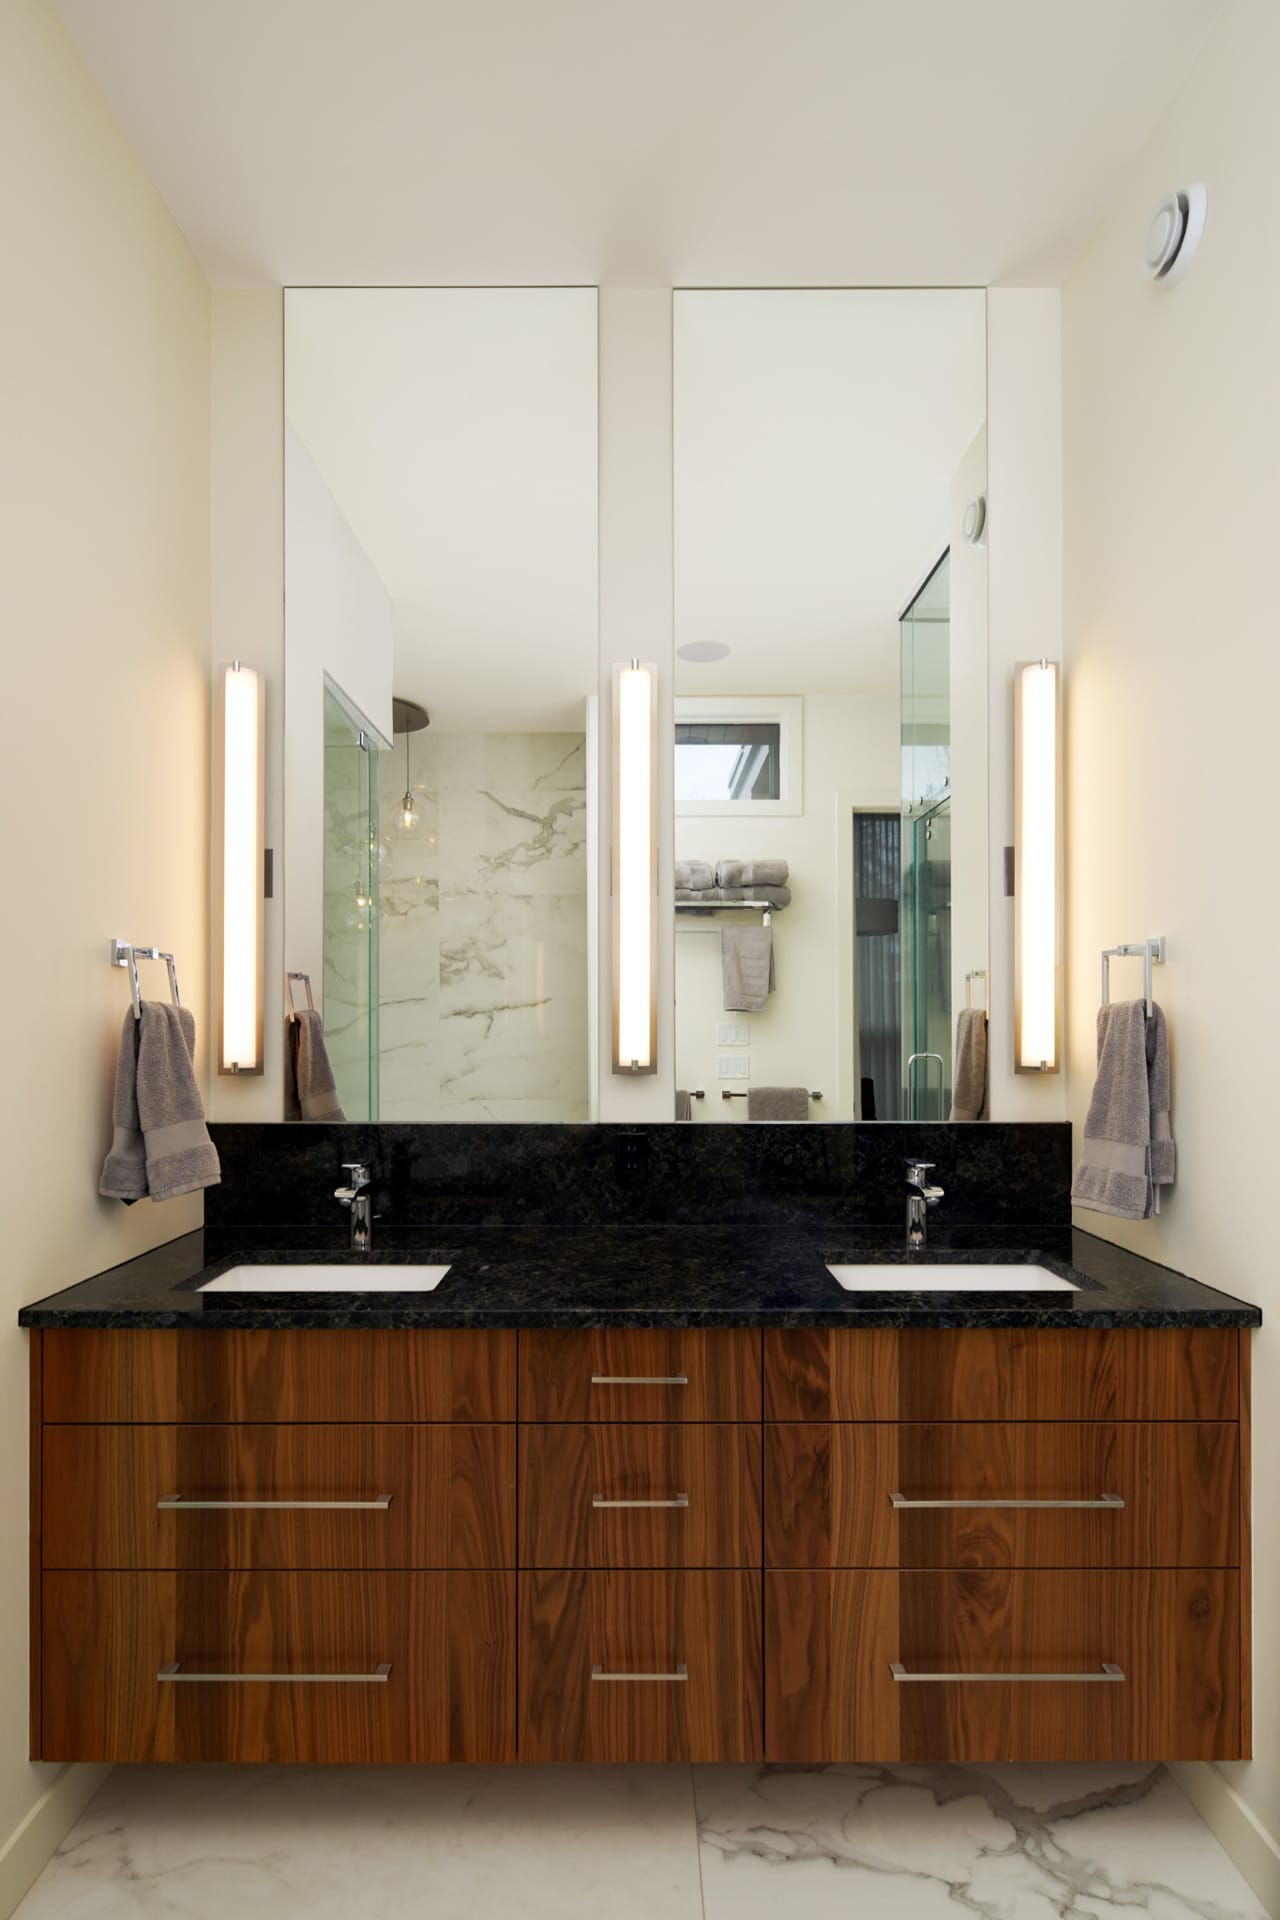 Matching the kitchen, the main floor bath includes a matching vanity in the same vertical grain walnut cabinetry.